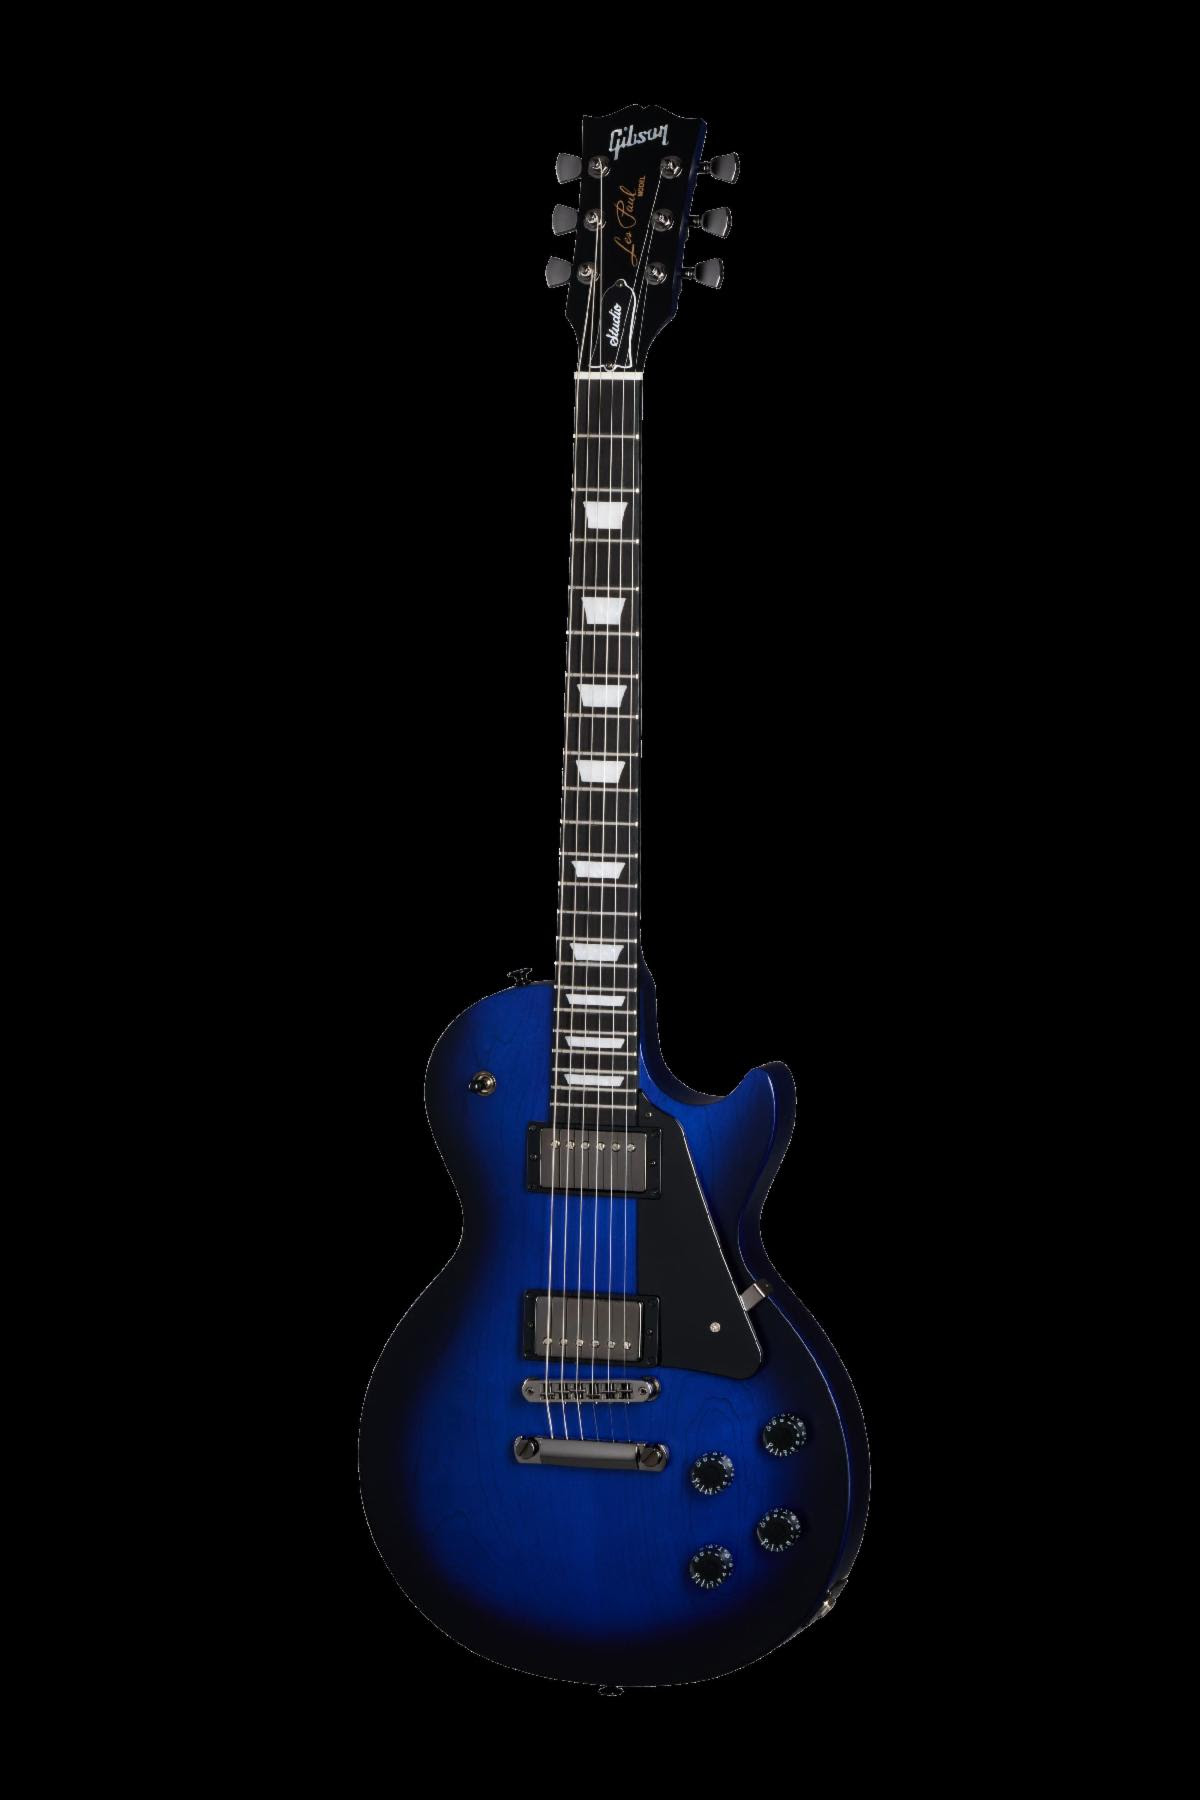 Above: Gibson Les Paul Modern Studio exclusive version in Manhattan Midnight Satin finish, available only via the Gibson Garage Nashville, and on Gibson.com.